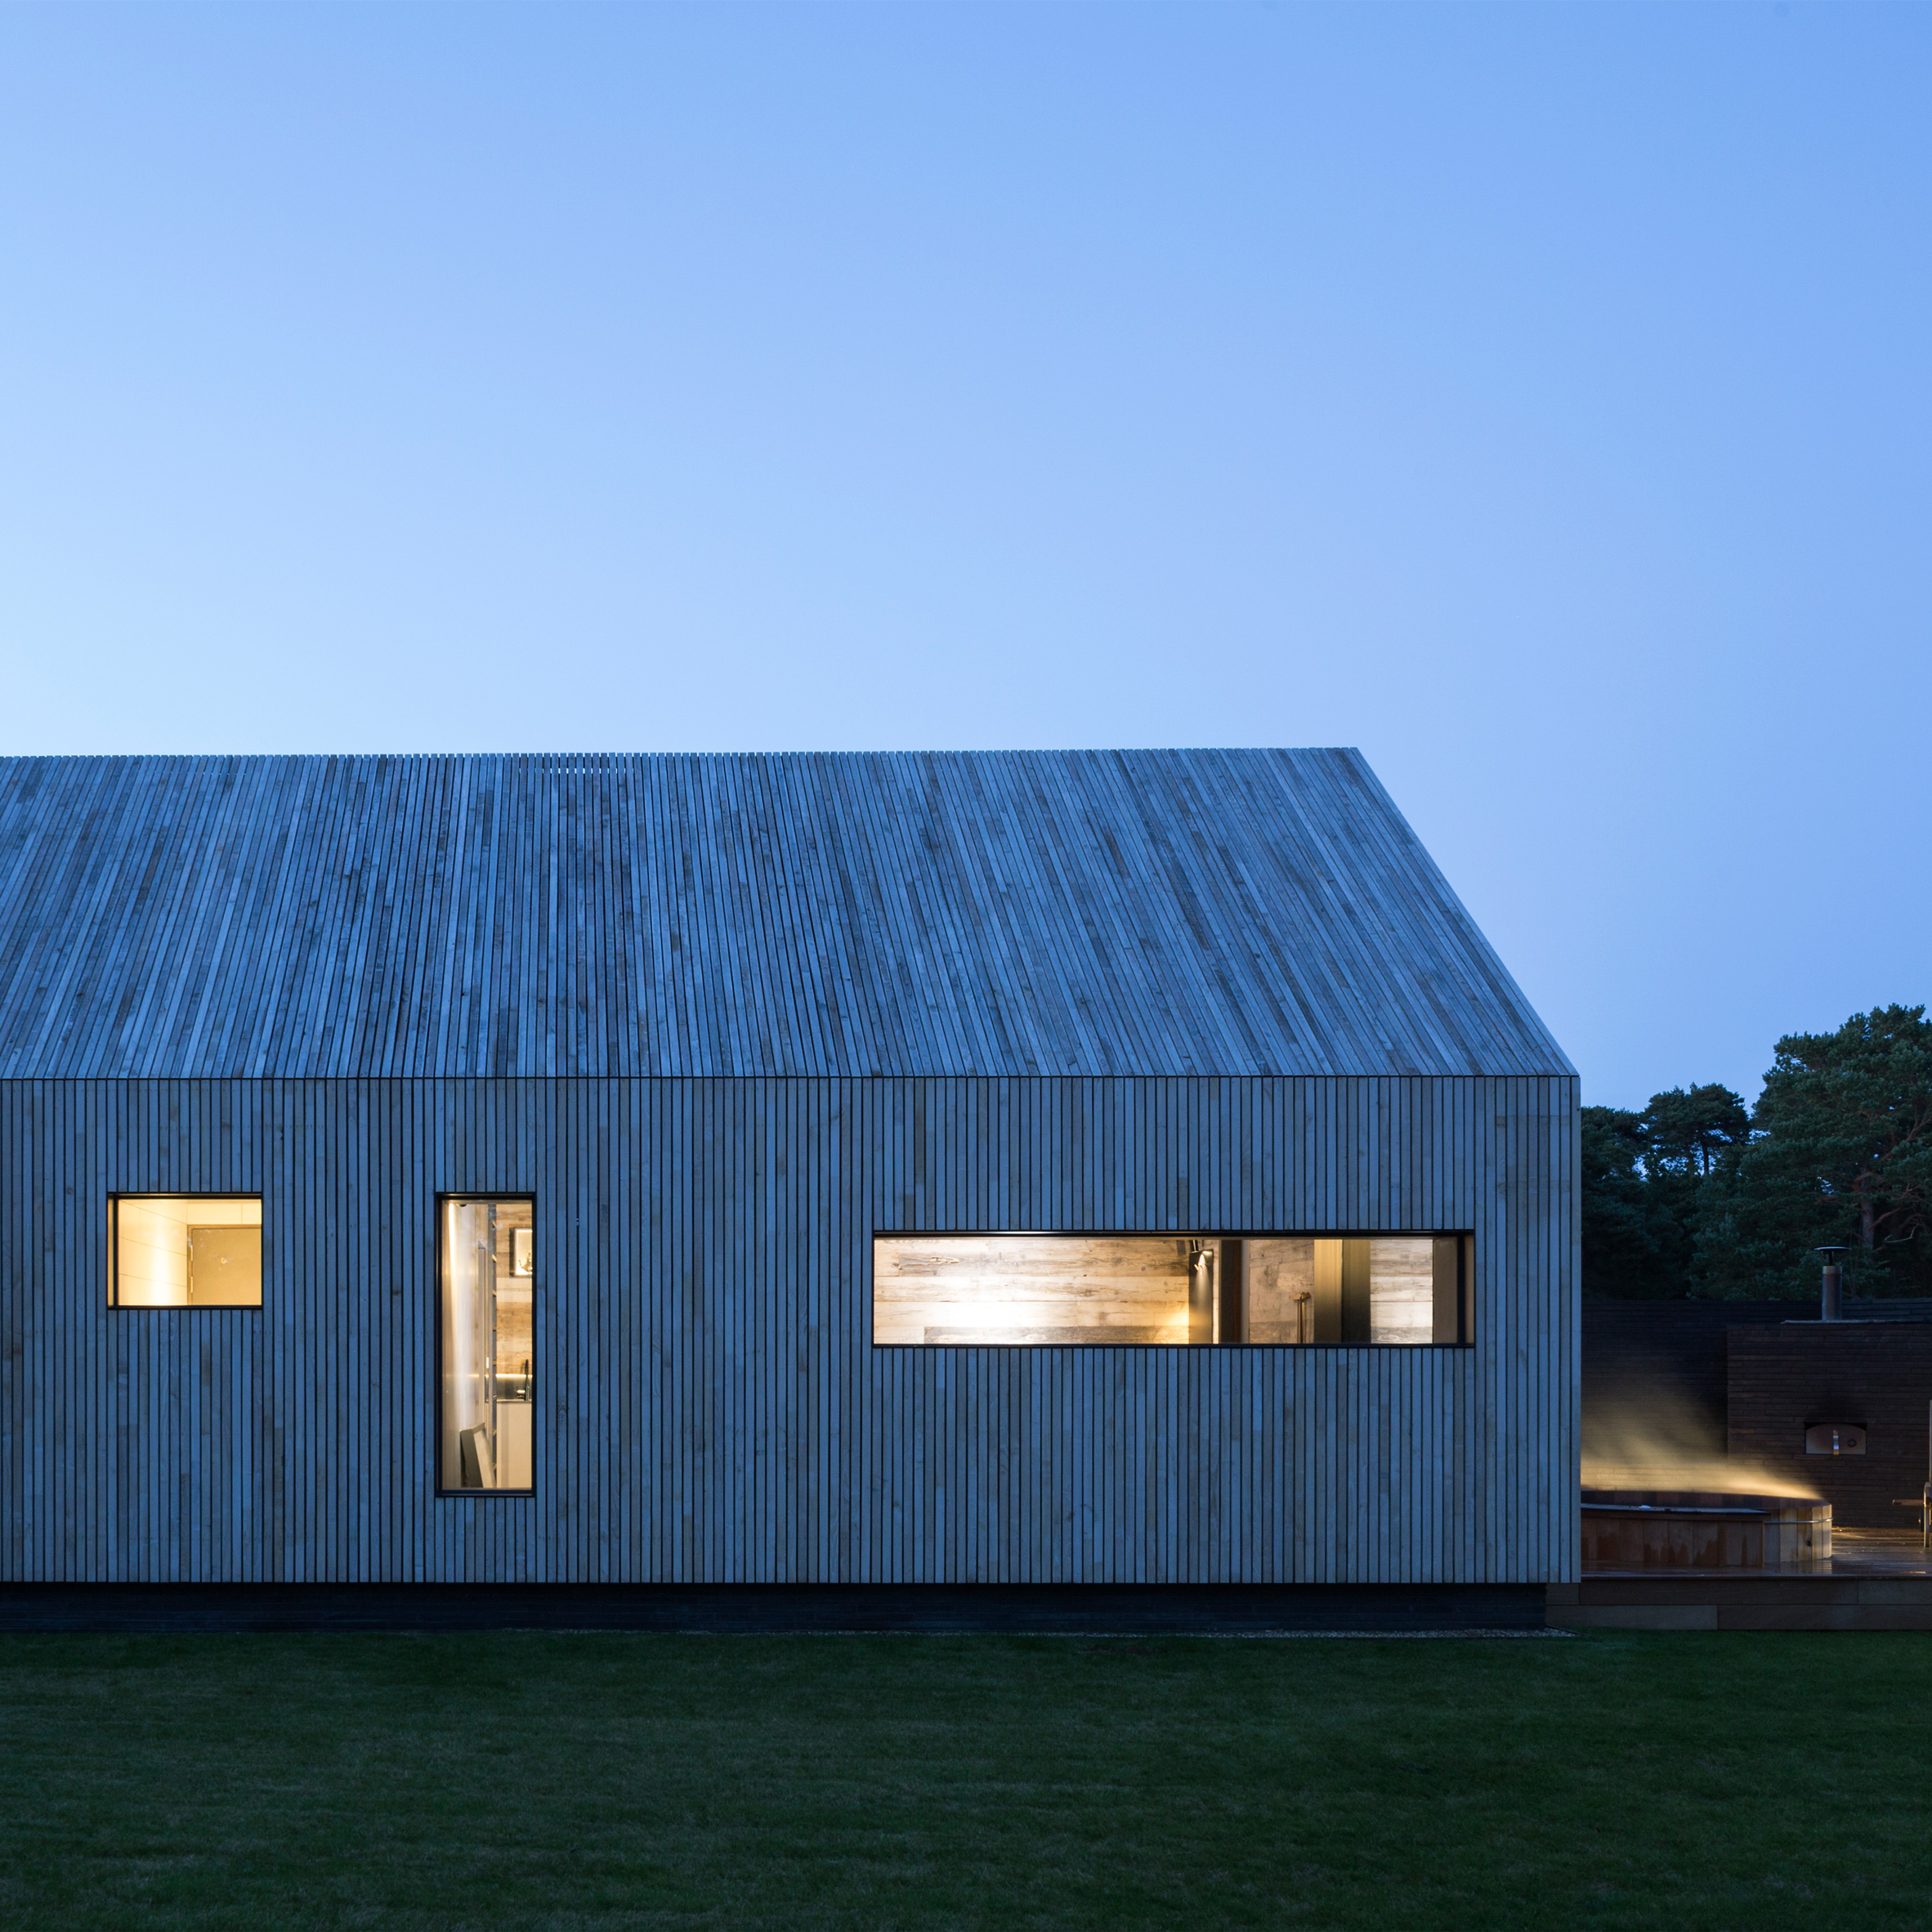 Top architecture and design roles: Architect at Ström Architects in Lymington, UK